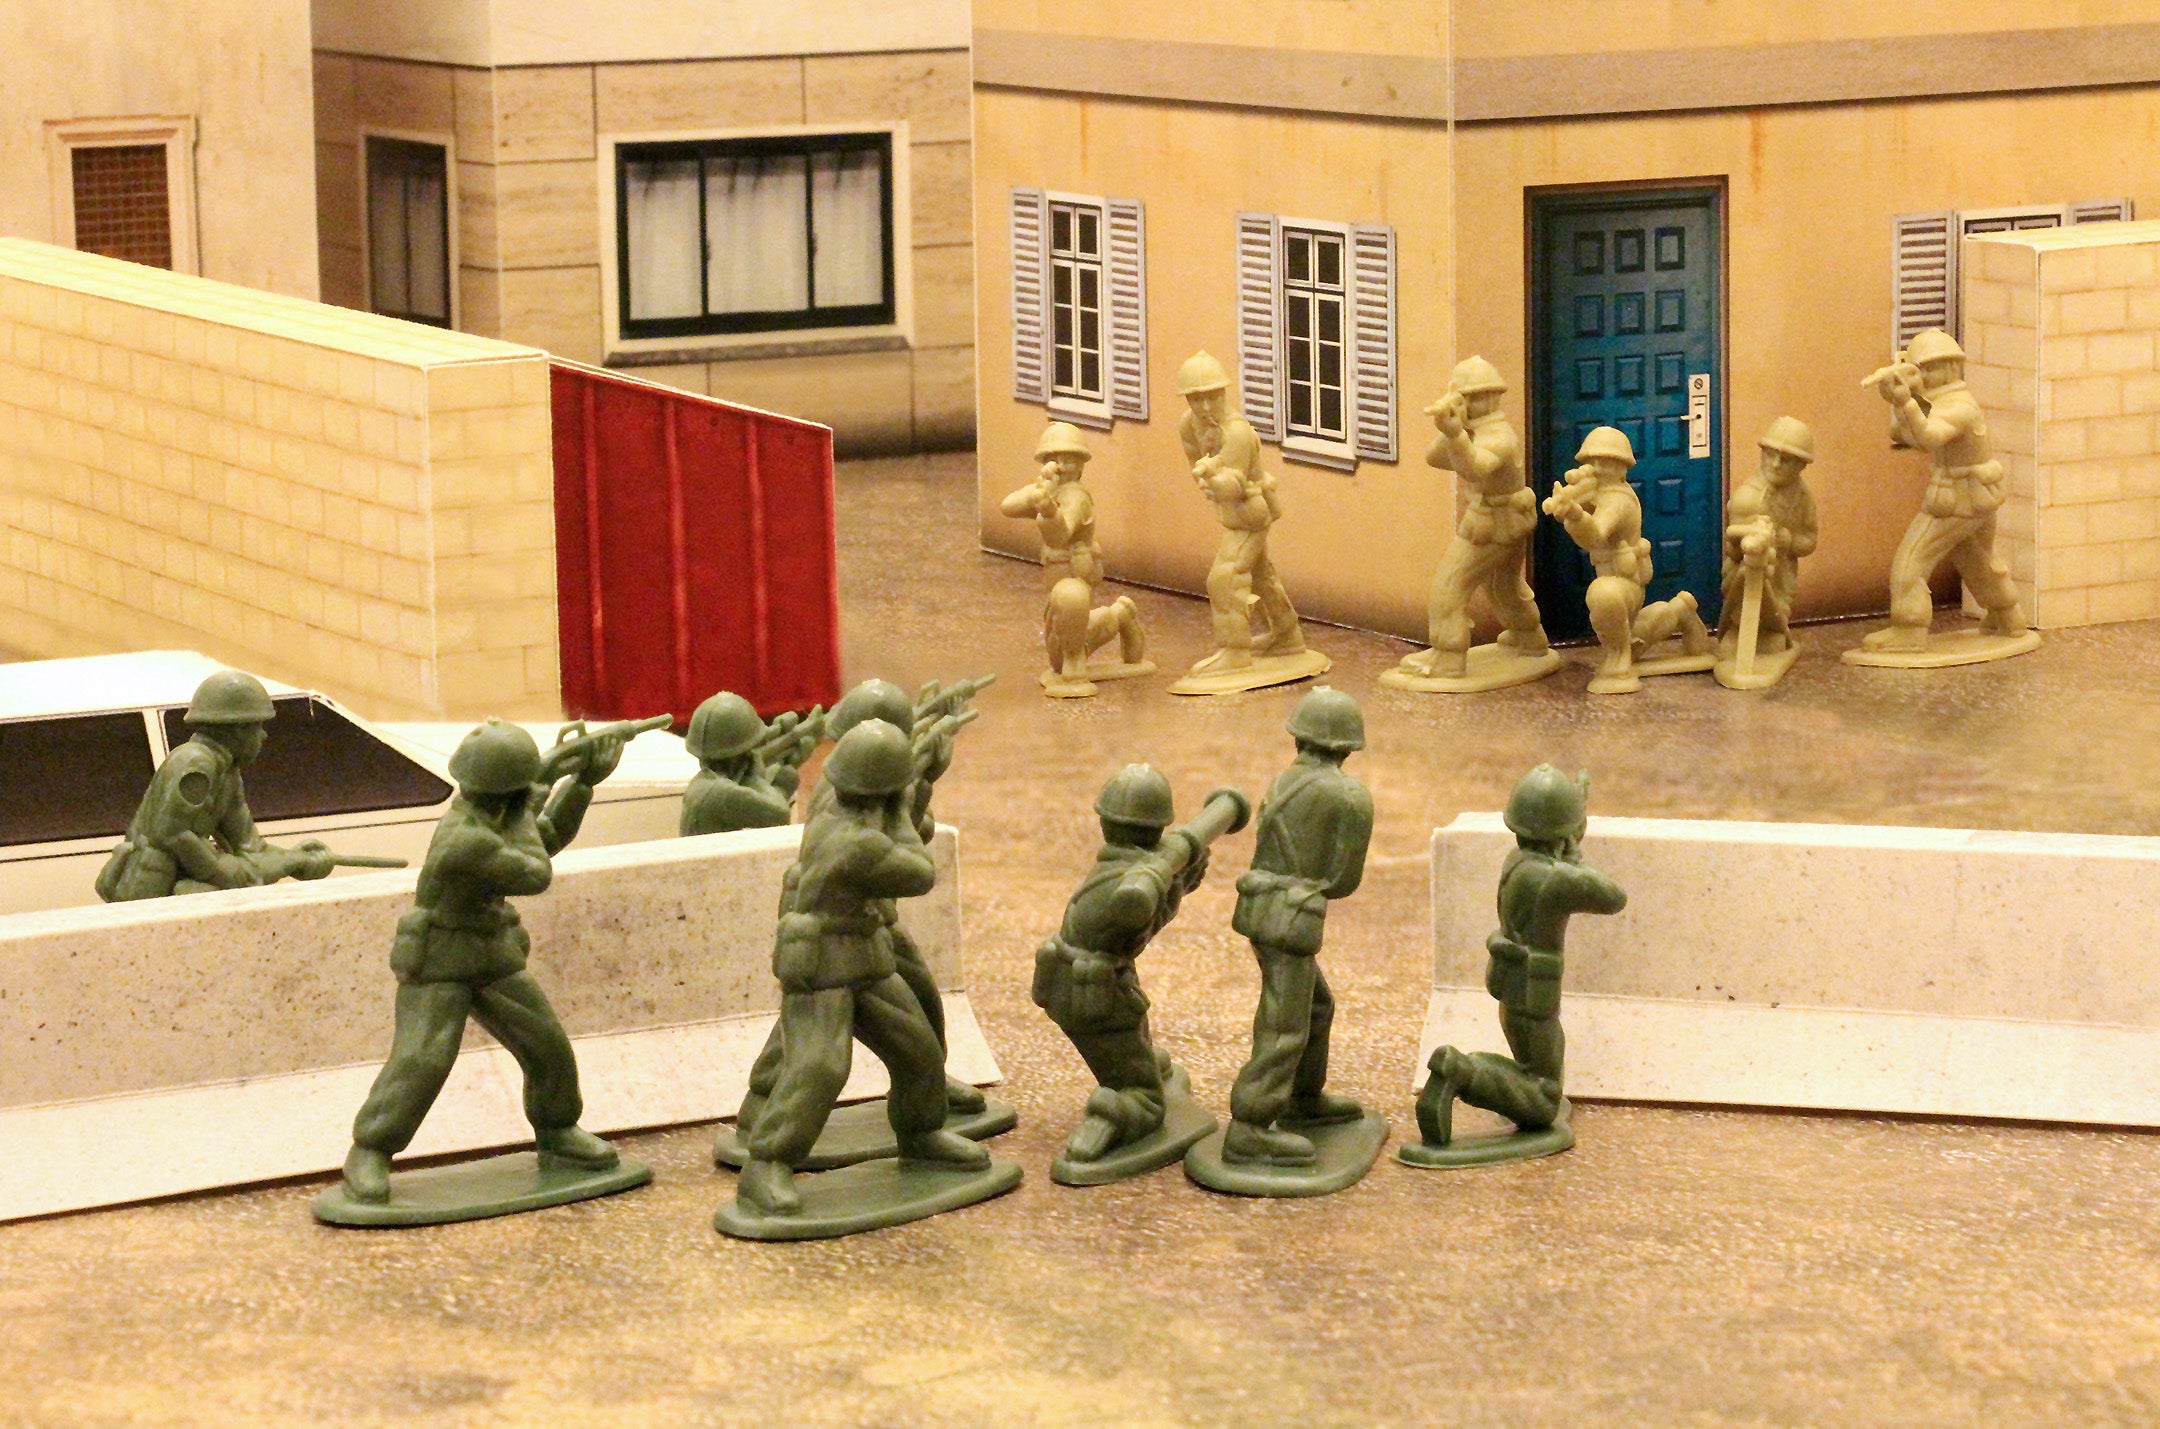 tan and green plastic army men face off in a city street made of papercraft terrain